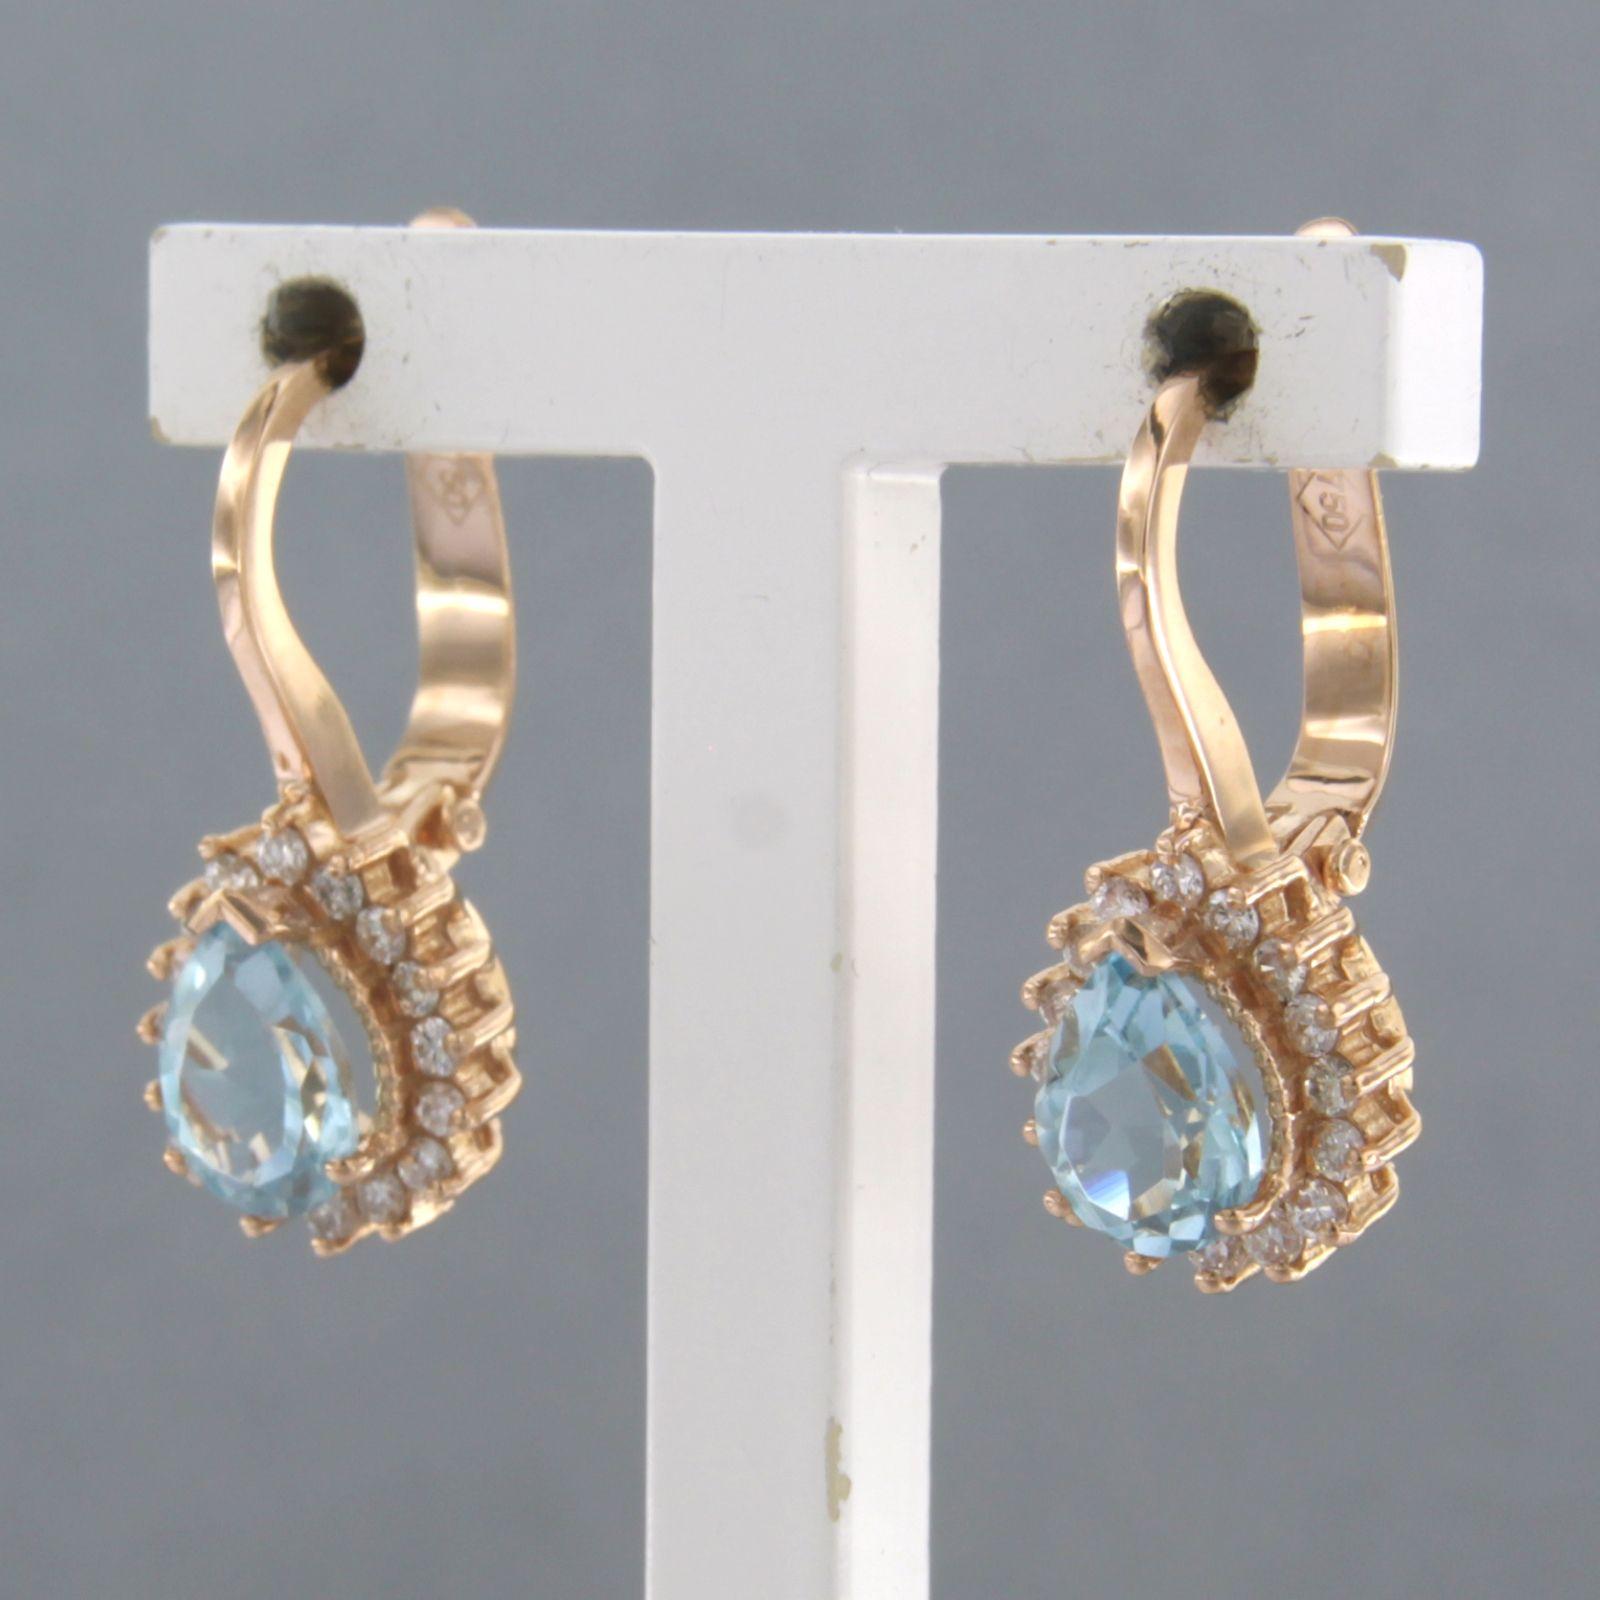 18k pink gold earrings set with topaz 1.52 ct and brilliant cut diamond 0.30 ct F/G VS/SI

Detailed description:

The earrings are 2.0 cm high and 1.0 cm wide

Total weight 4.0 grams

set with

- 2 x 7.0 mm x 5.0 mm pearshape facet cut topaz, total